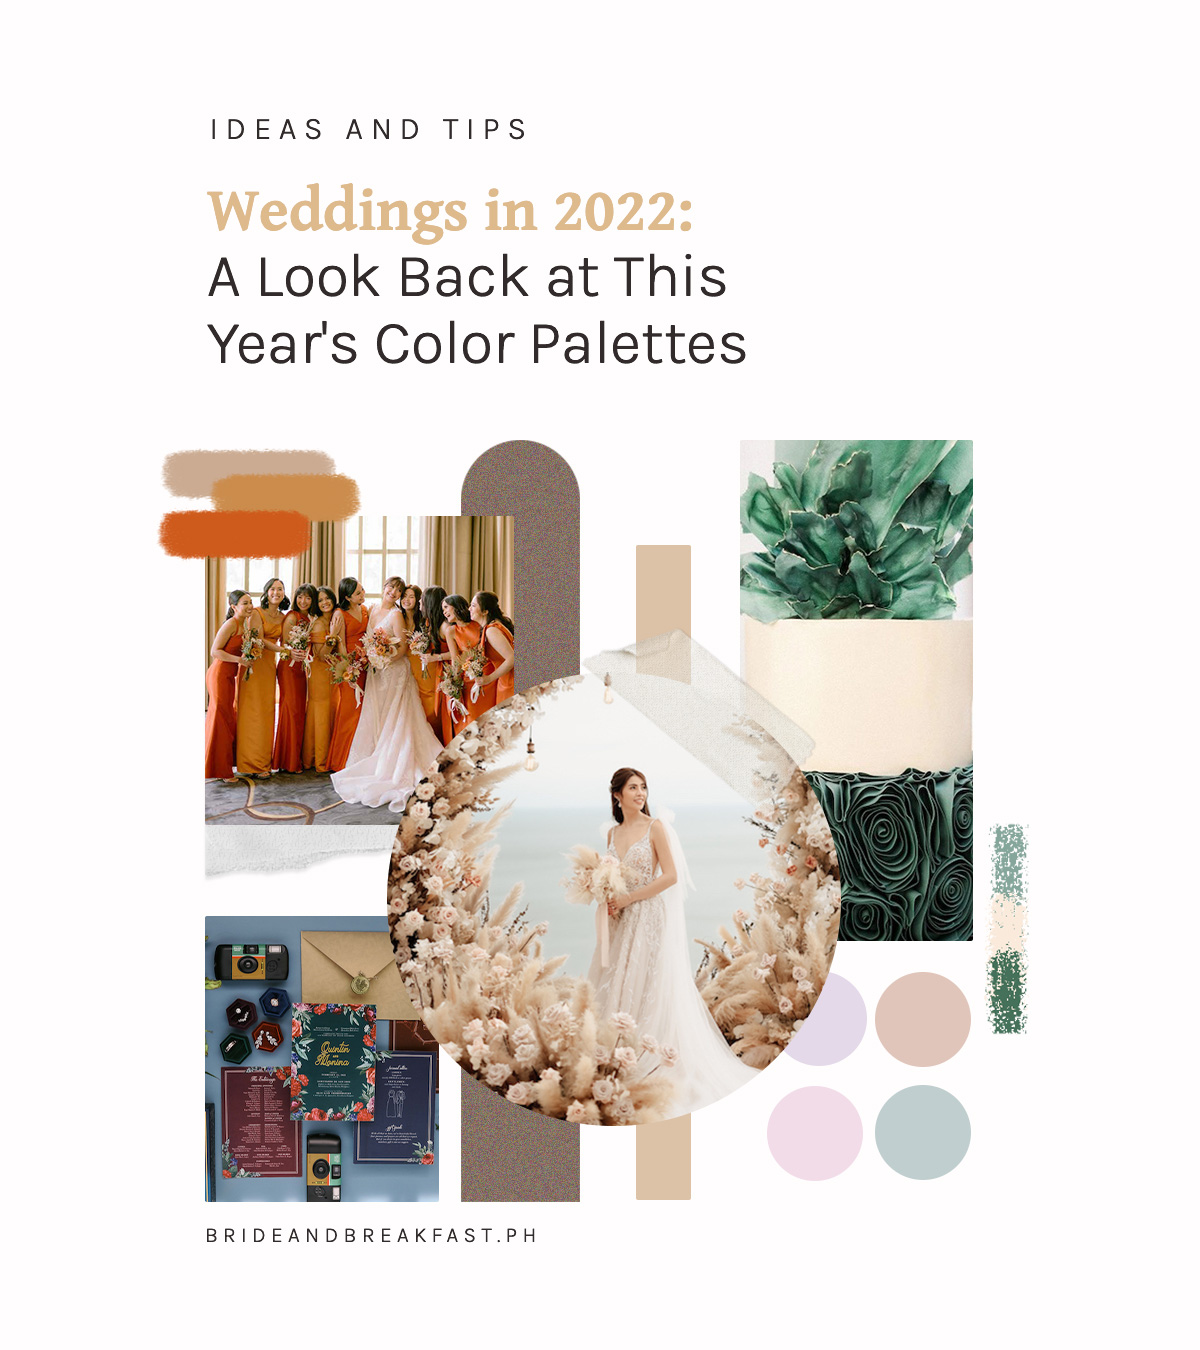 Weddings in 2022: A Look Back at This Year's Color Palettes 